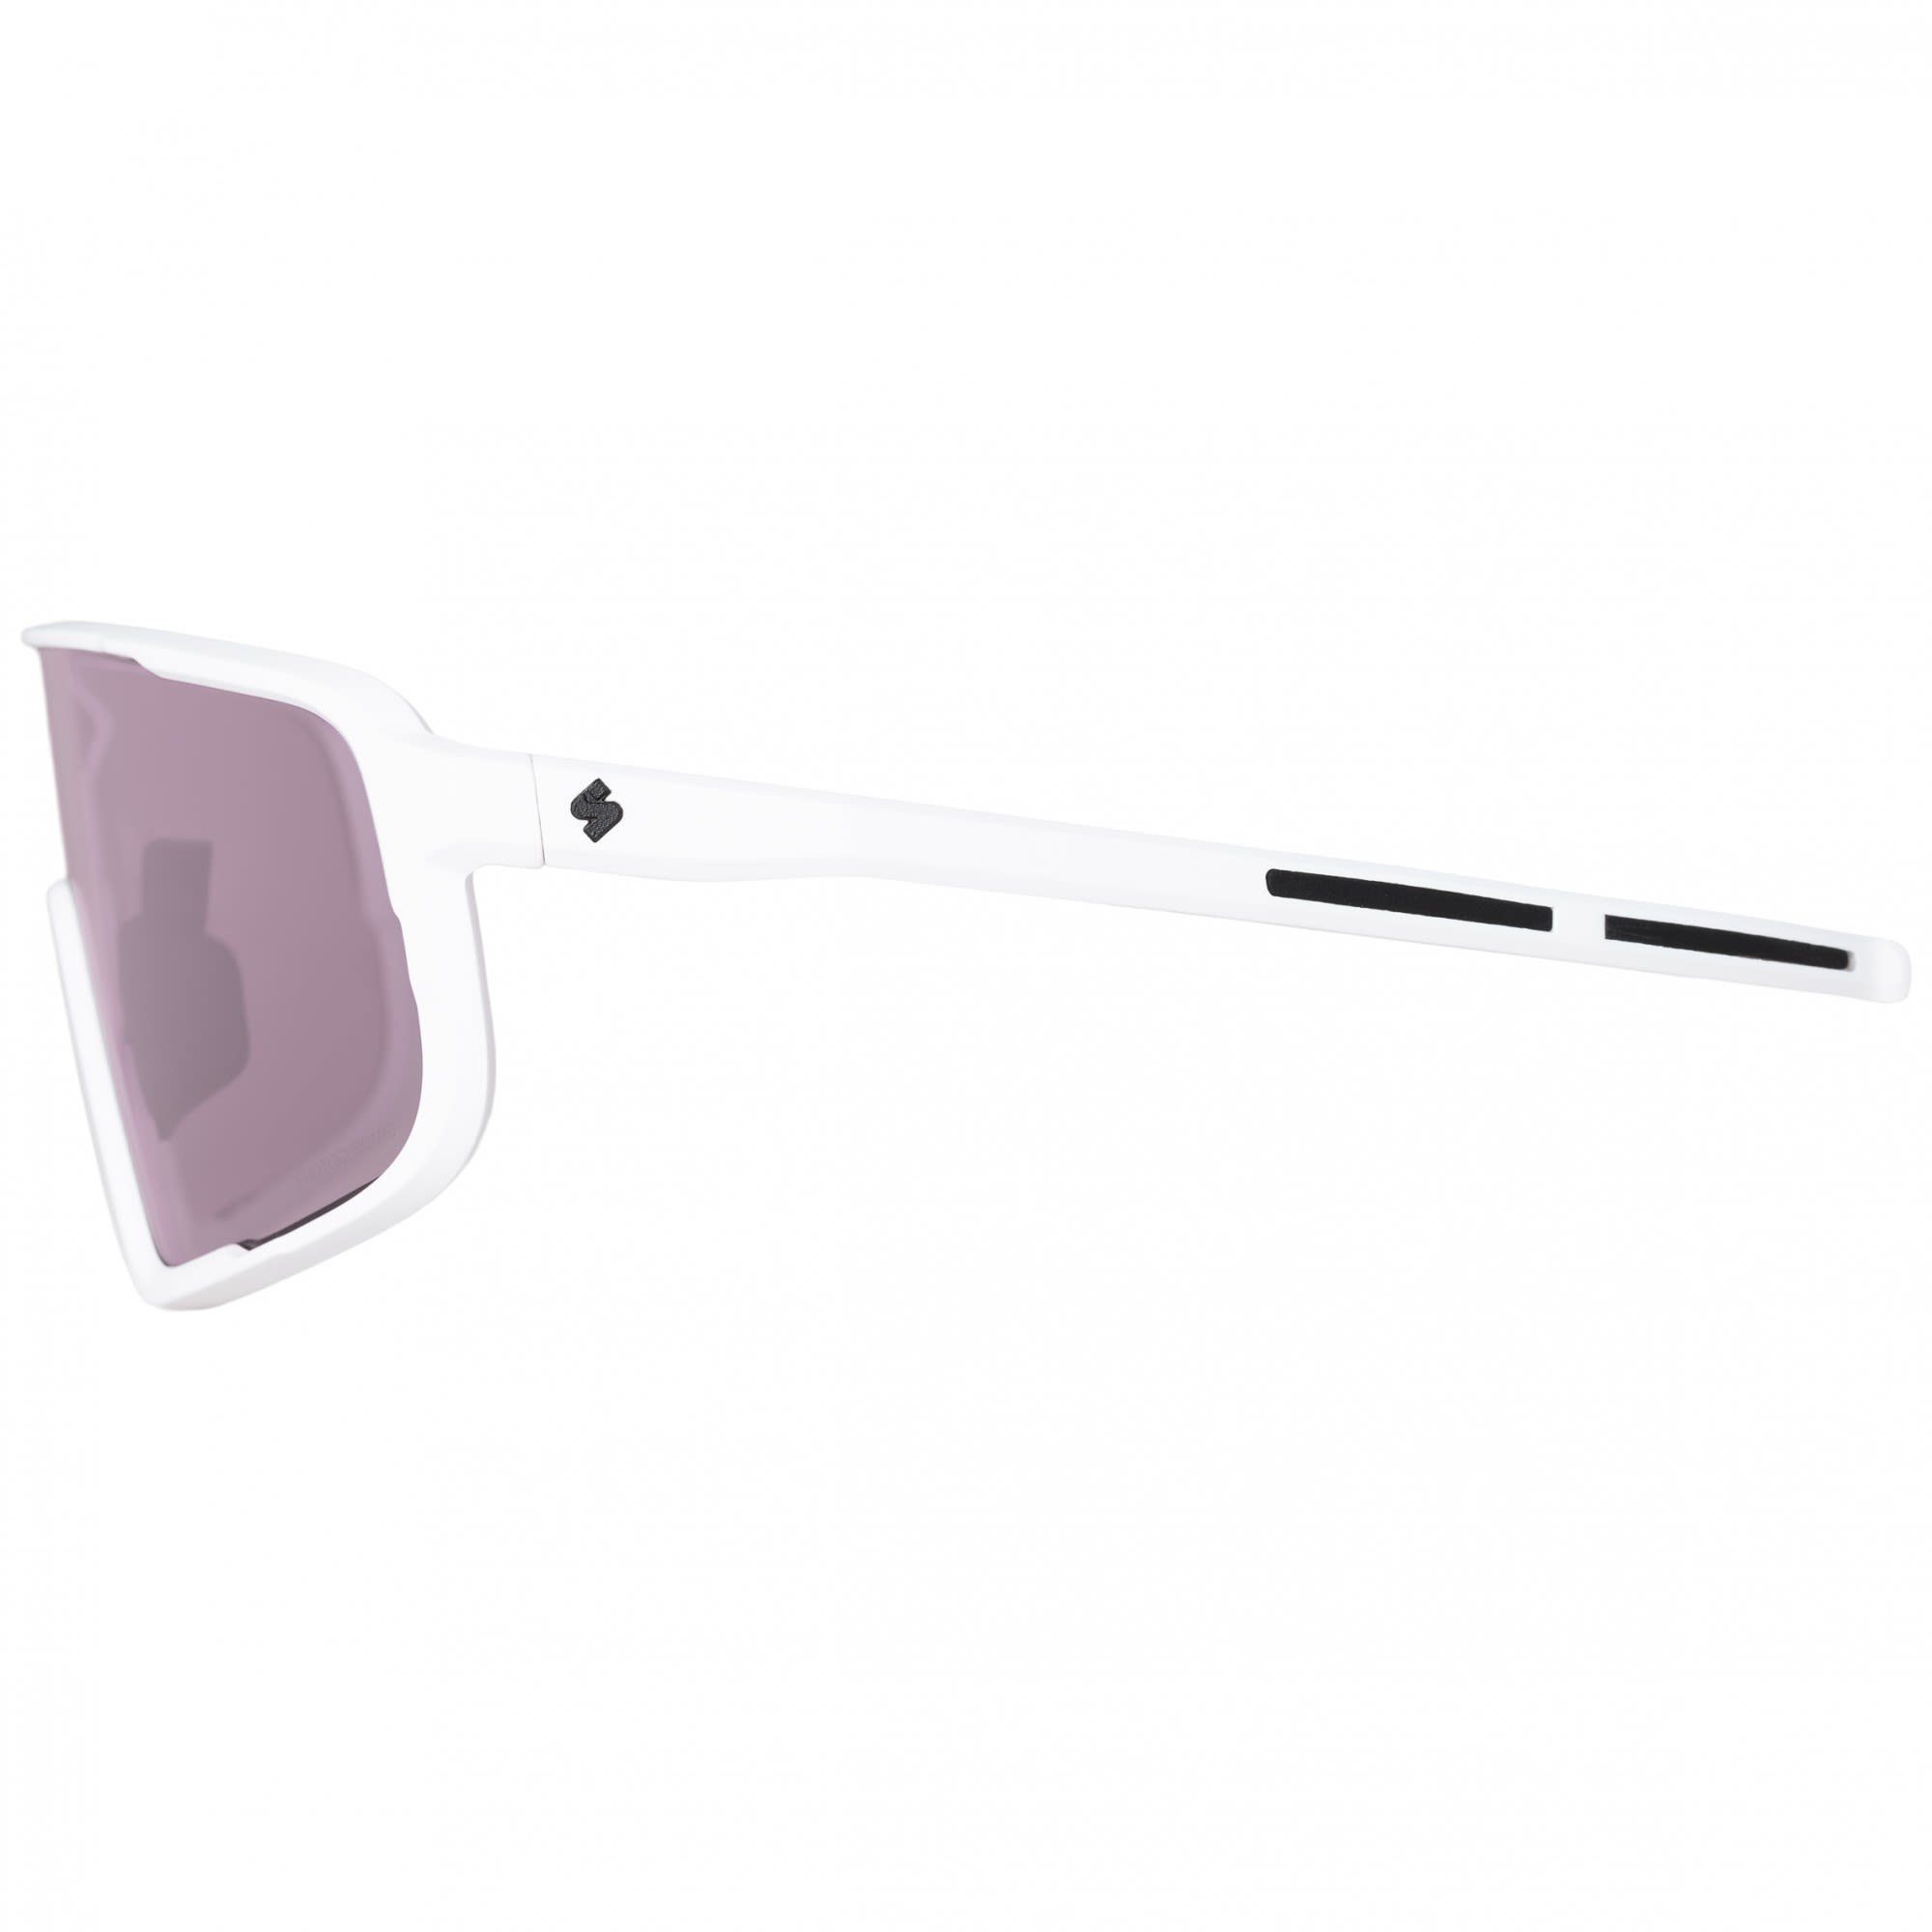 Sweet Protection Sportbrille Sweet - Photochromic Rig Memento Photochromic RIG Protection White Satin